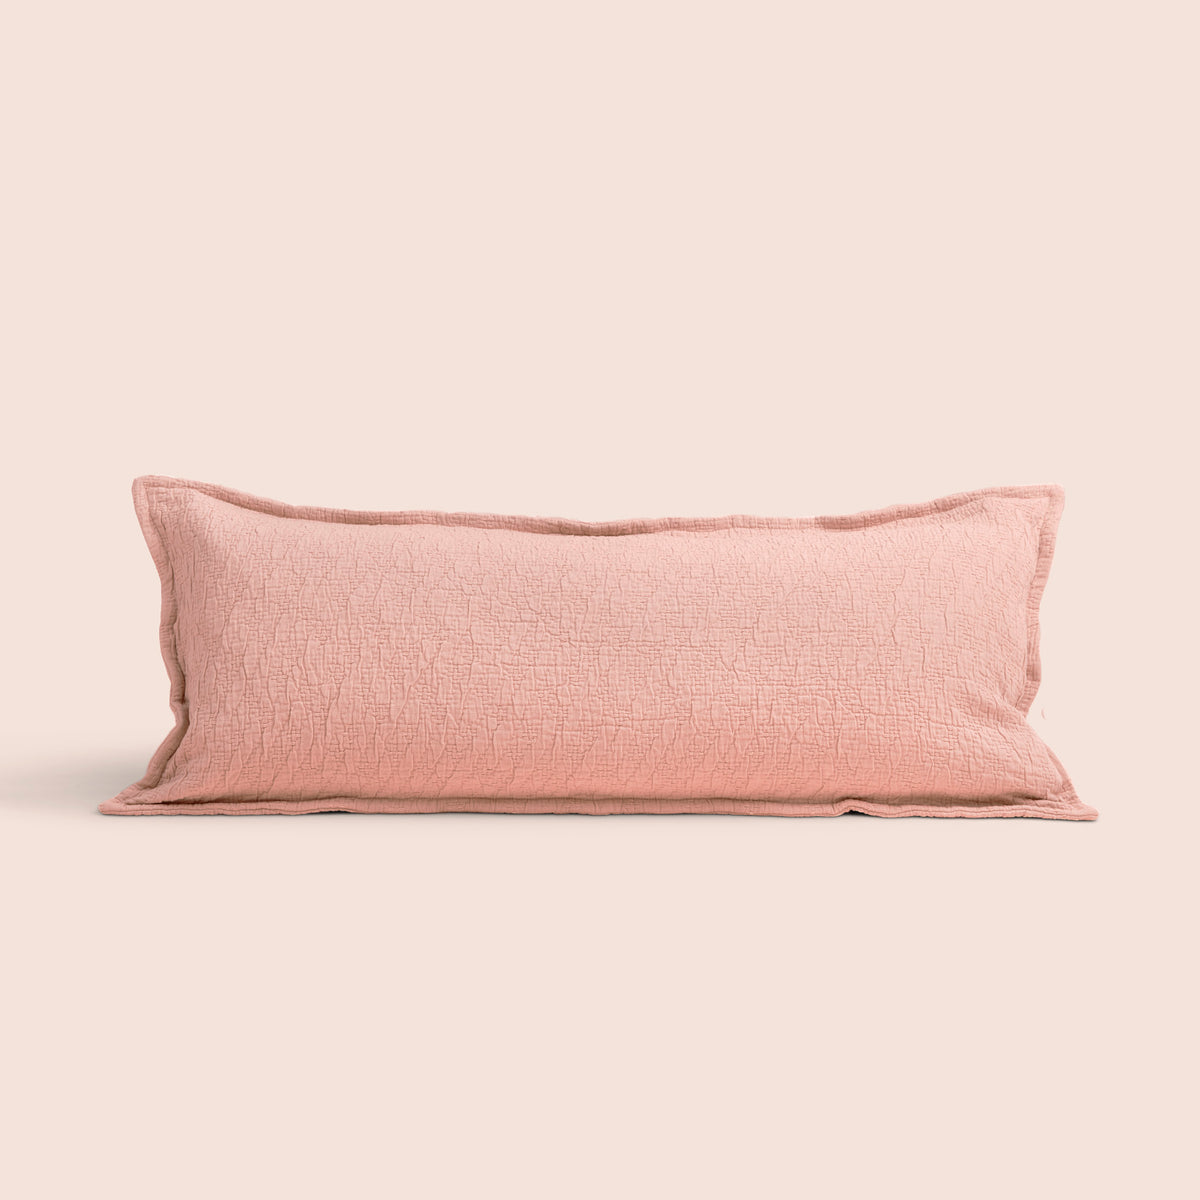 Image of a Pink Sandstone Wave Lumbar Pillow Cover on a lumbar pillow with a light pink background